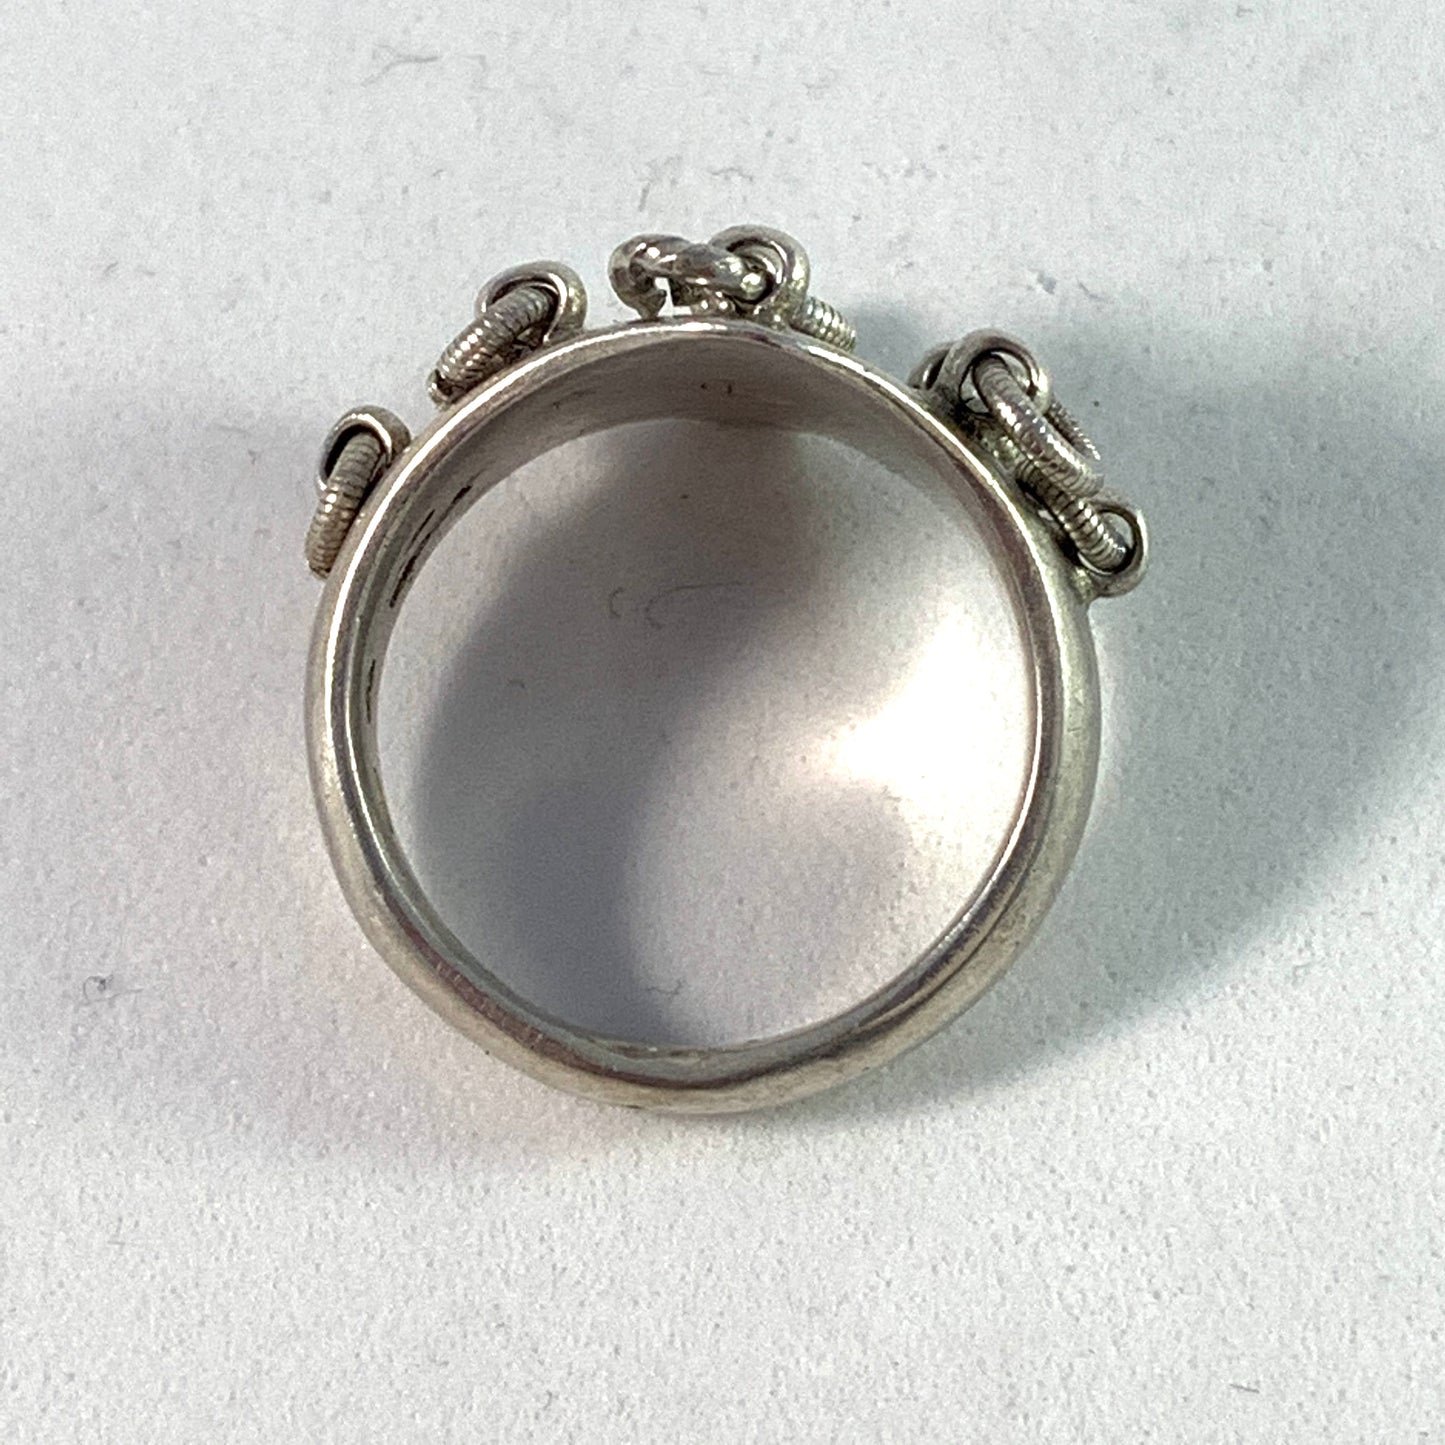 Piteå, Sweden early 1900s, Solid Silver Traditional Sami Ring.